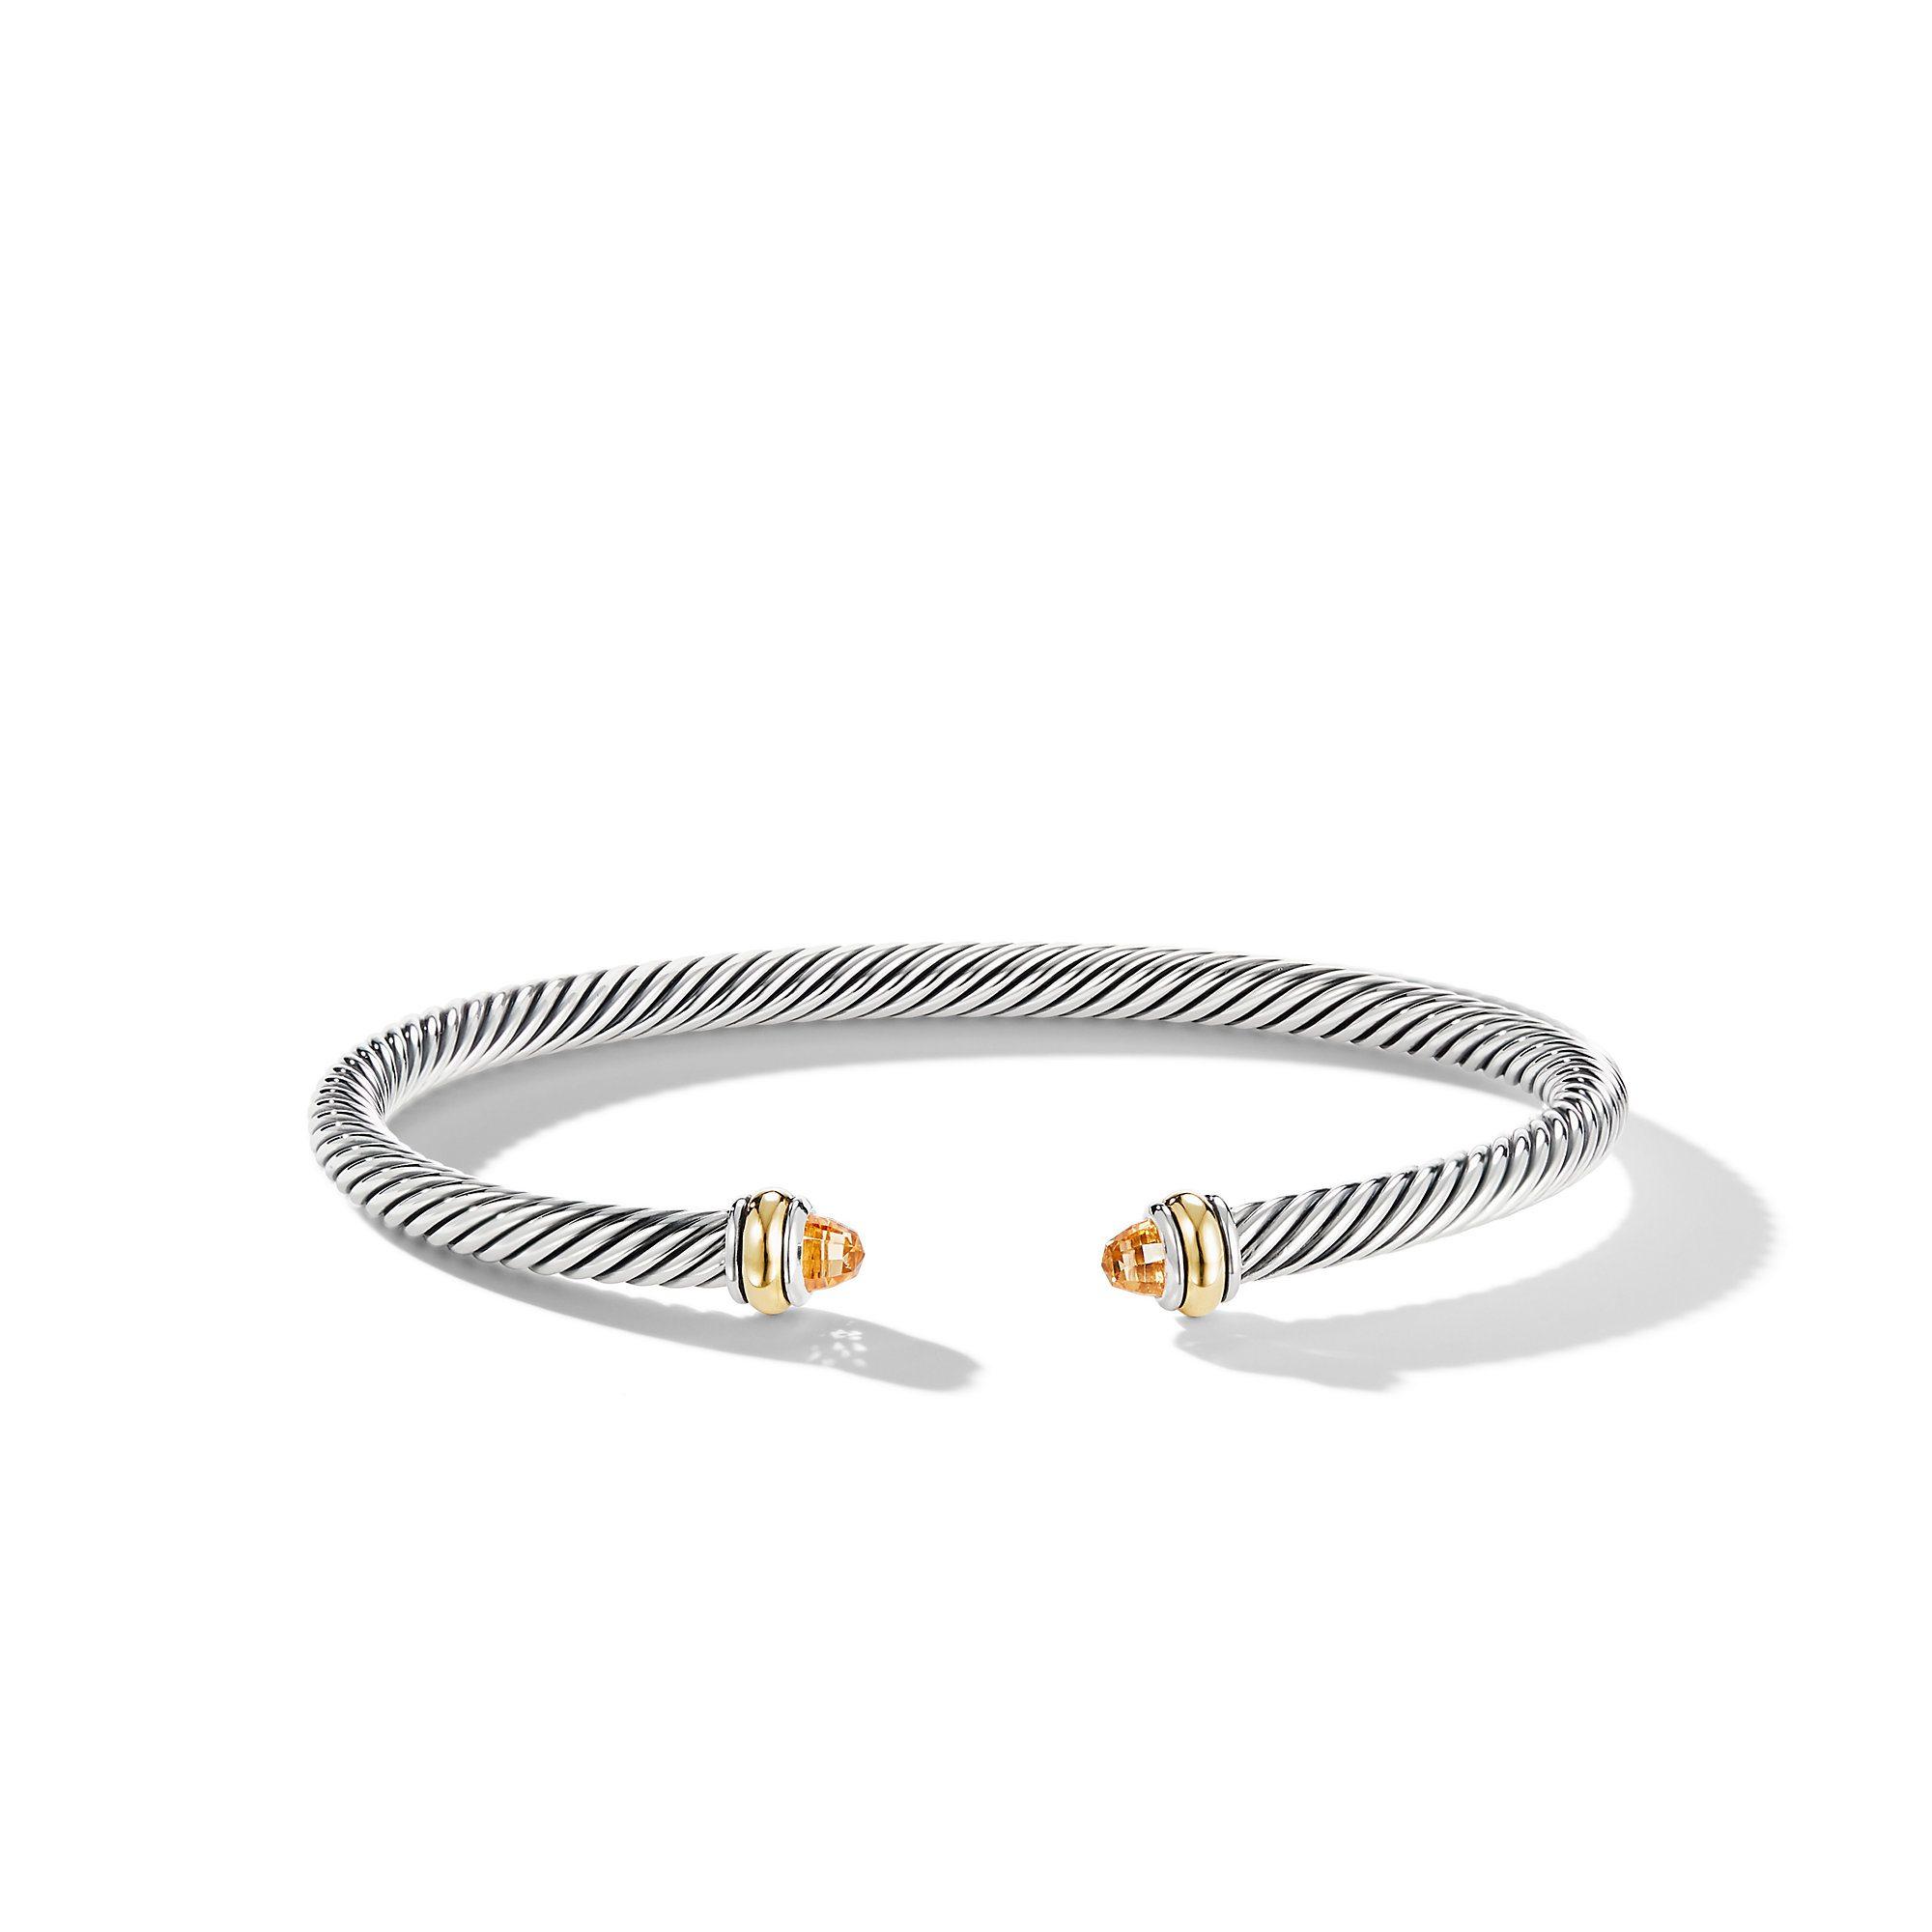 David Yurman Classic Cable 4mm Bracelet in Sterling Silver with Gold and Citrine